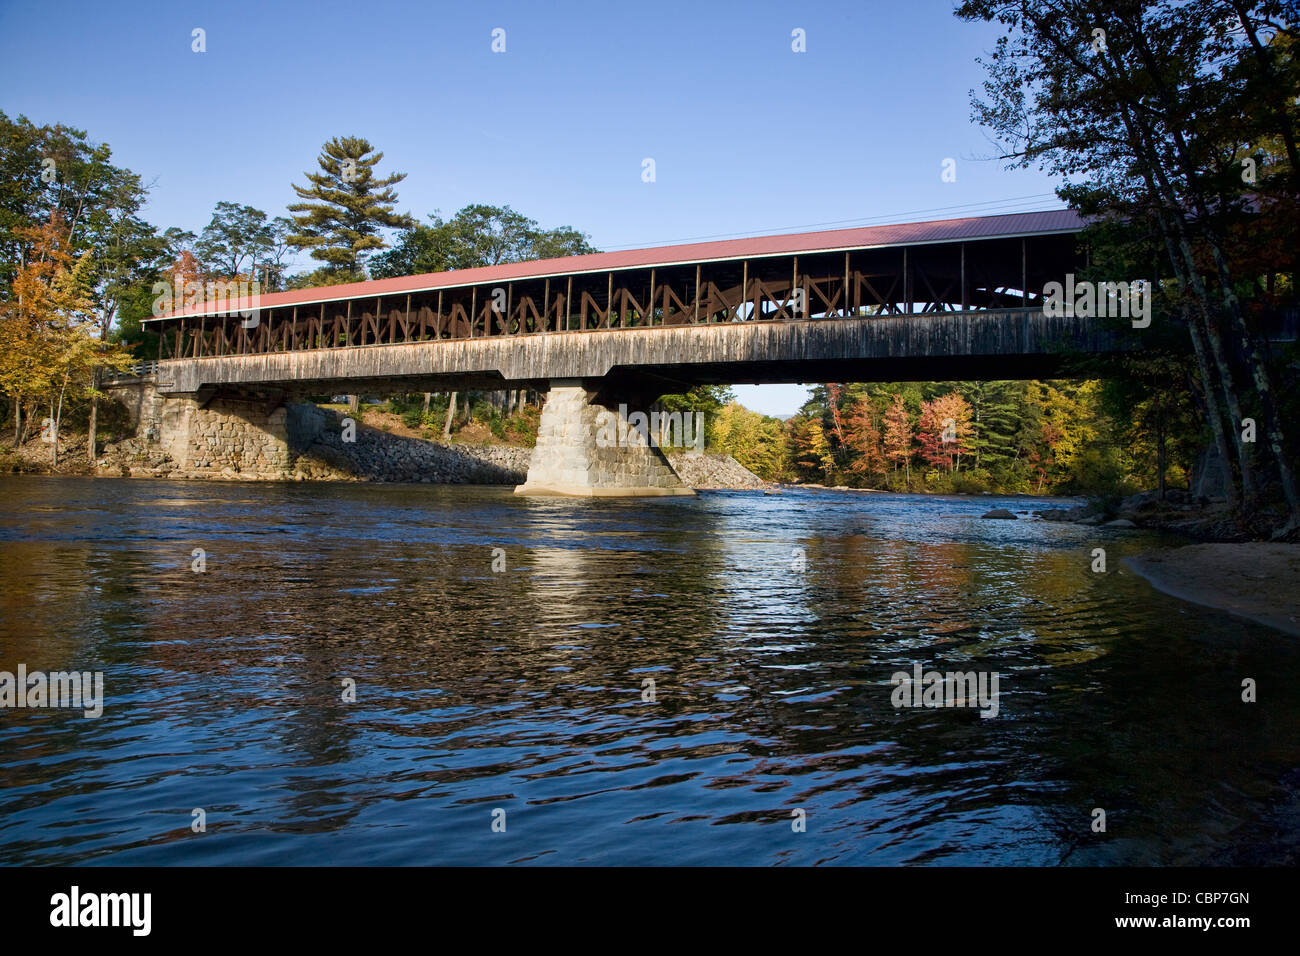 Die Swift River Covered Bridge in Conway New Hampshire. Stockfoto